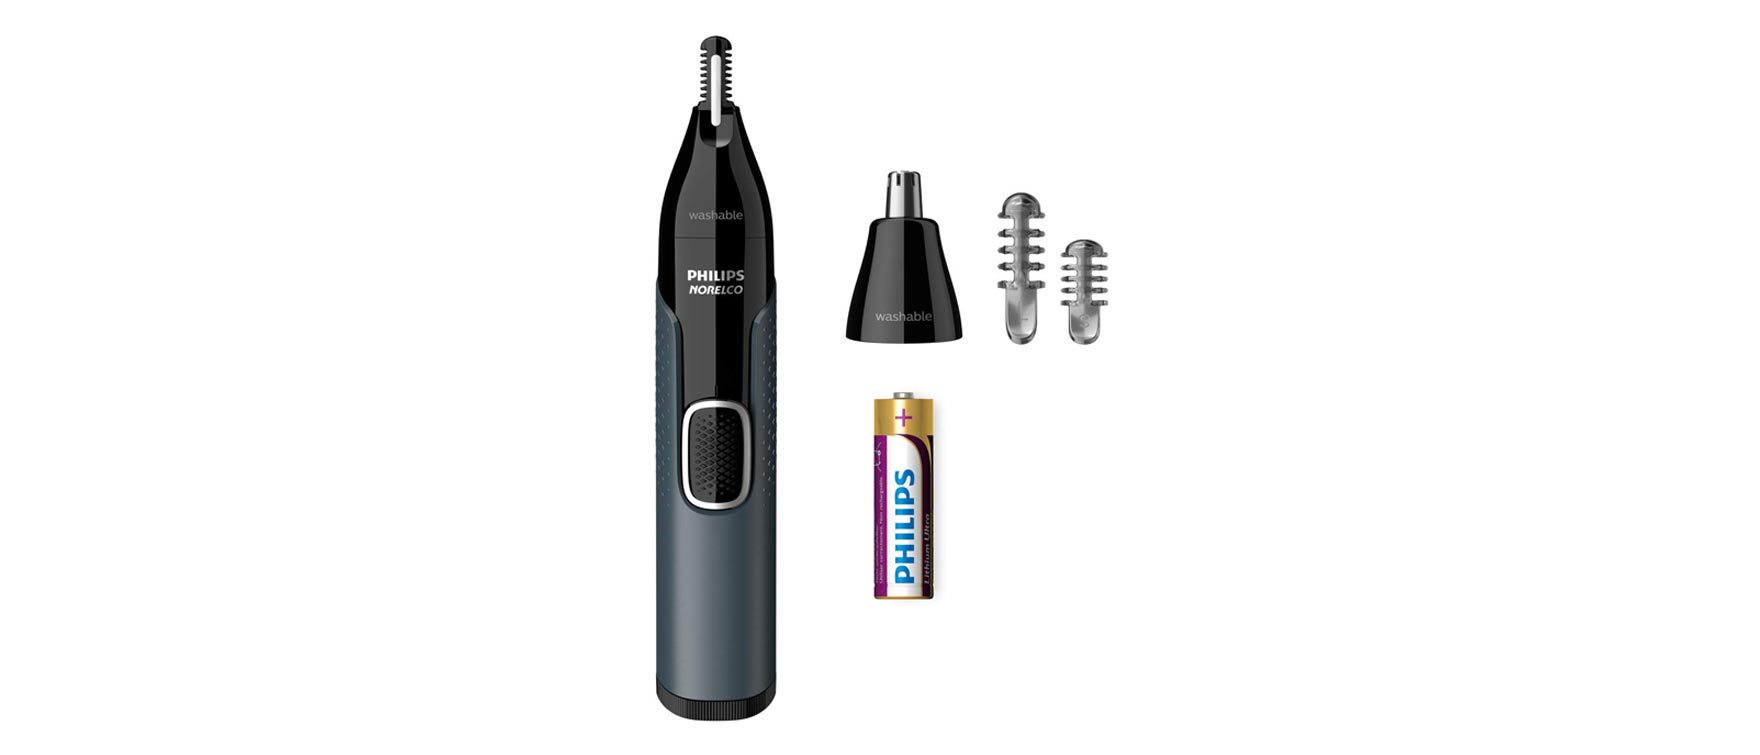 8. Philips Norelco Nose Trimmer 3000